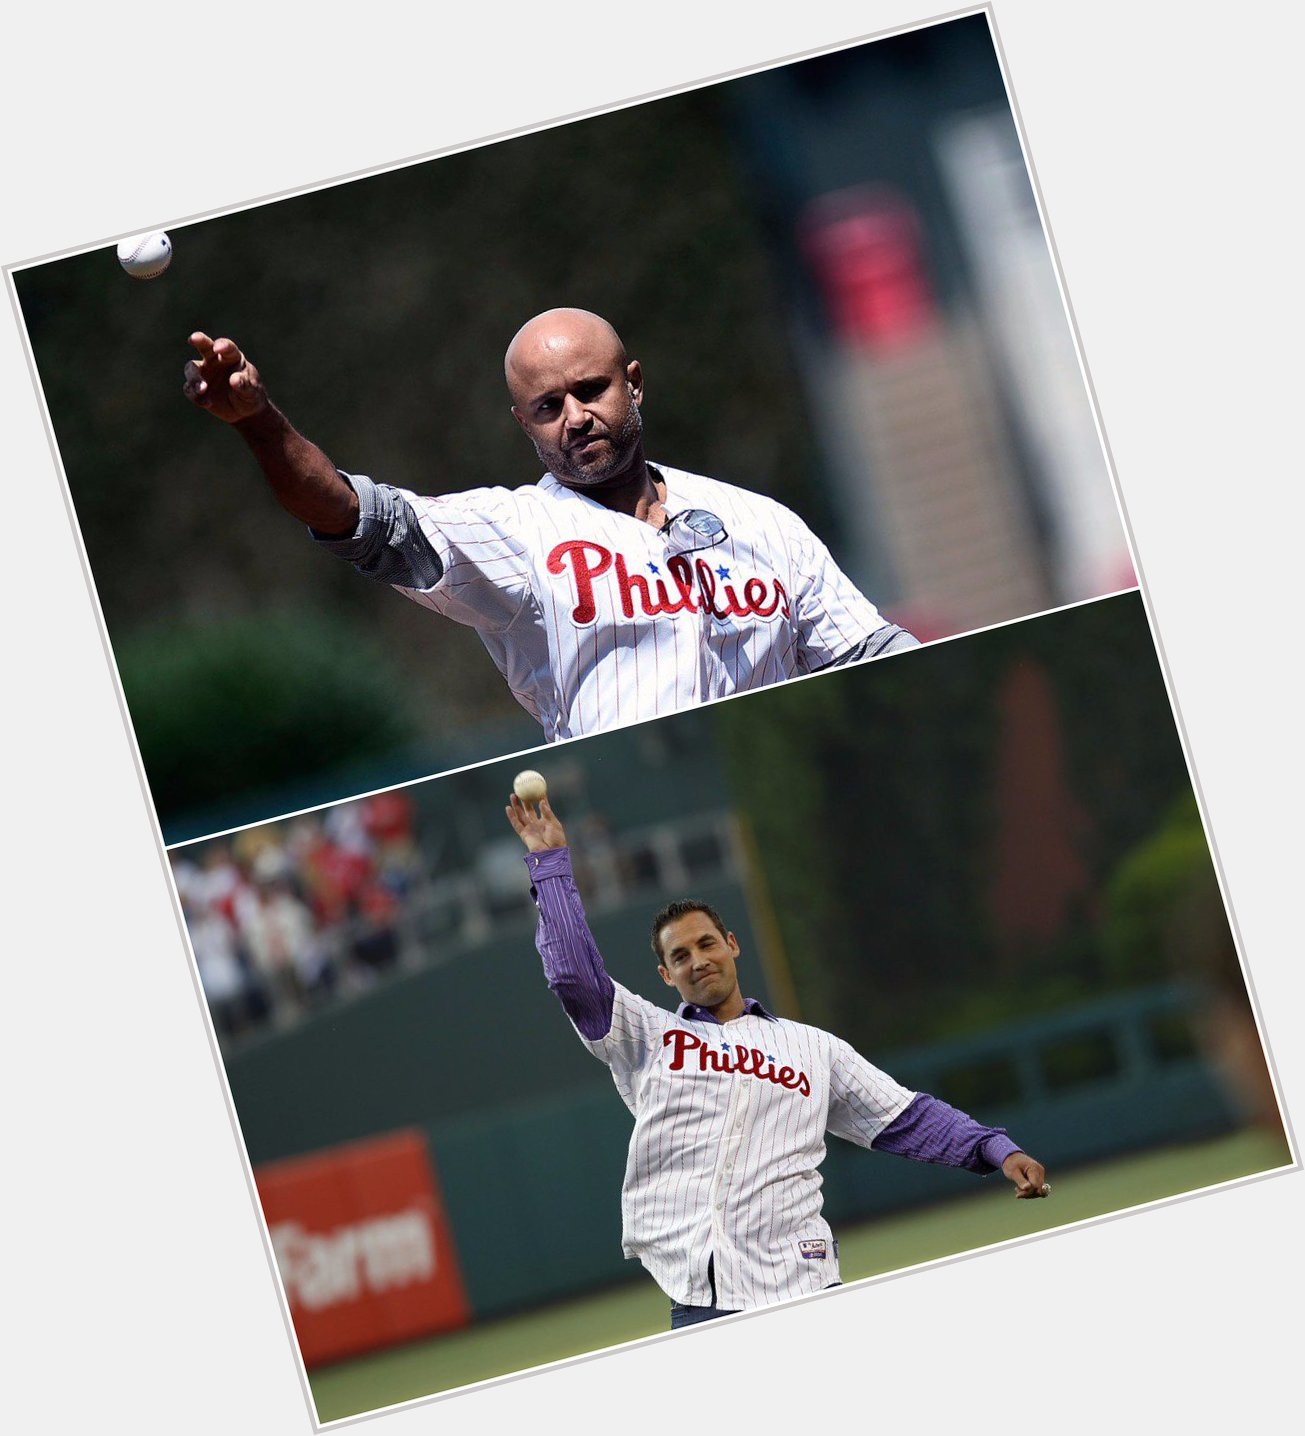  Like to send your happy birthday wishes to a couple former teammates, Placido Polanco and Pat Burrell! 